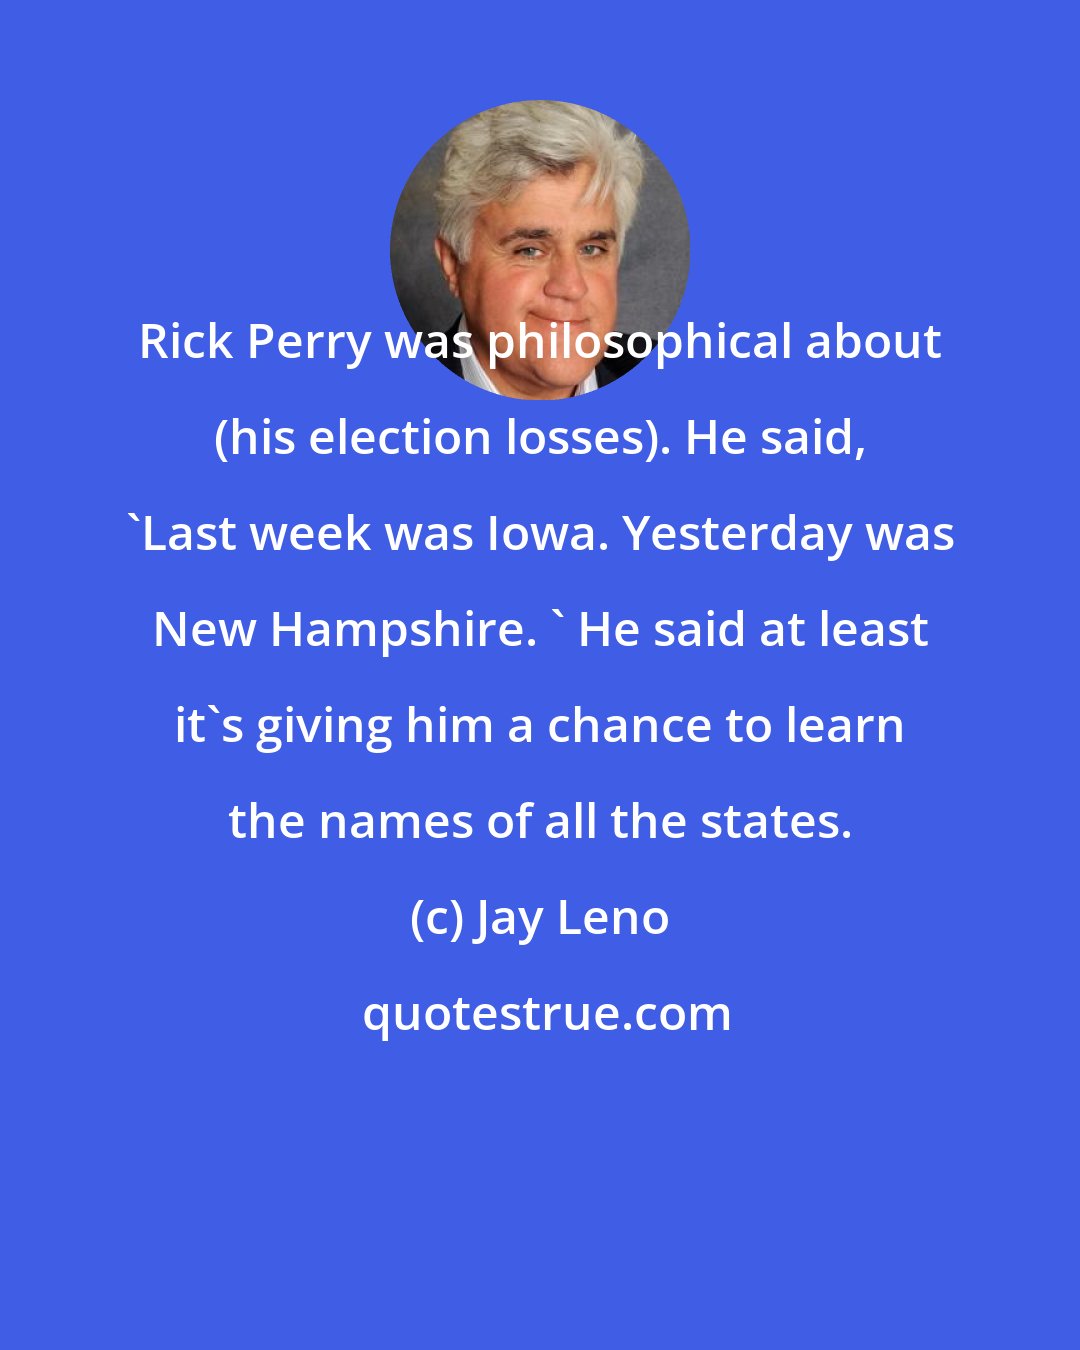 Jay Leno: Rick Perry was philosophical about (his election losses). He said, 'Last week was Iowa. Yesterday was New Hampshire. ' He said at least it's giving him a chance to learn the names of all the states.